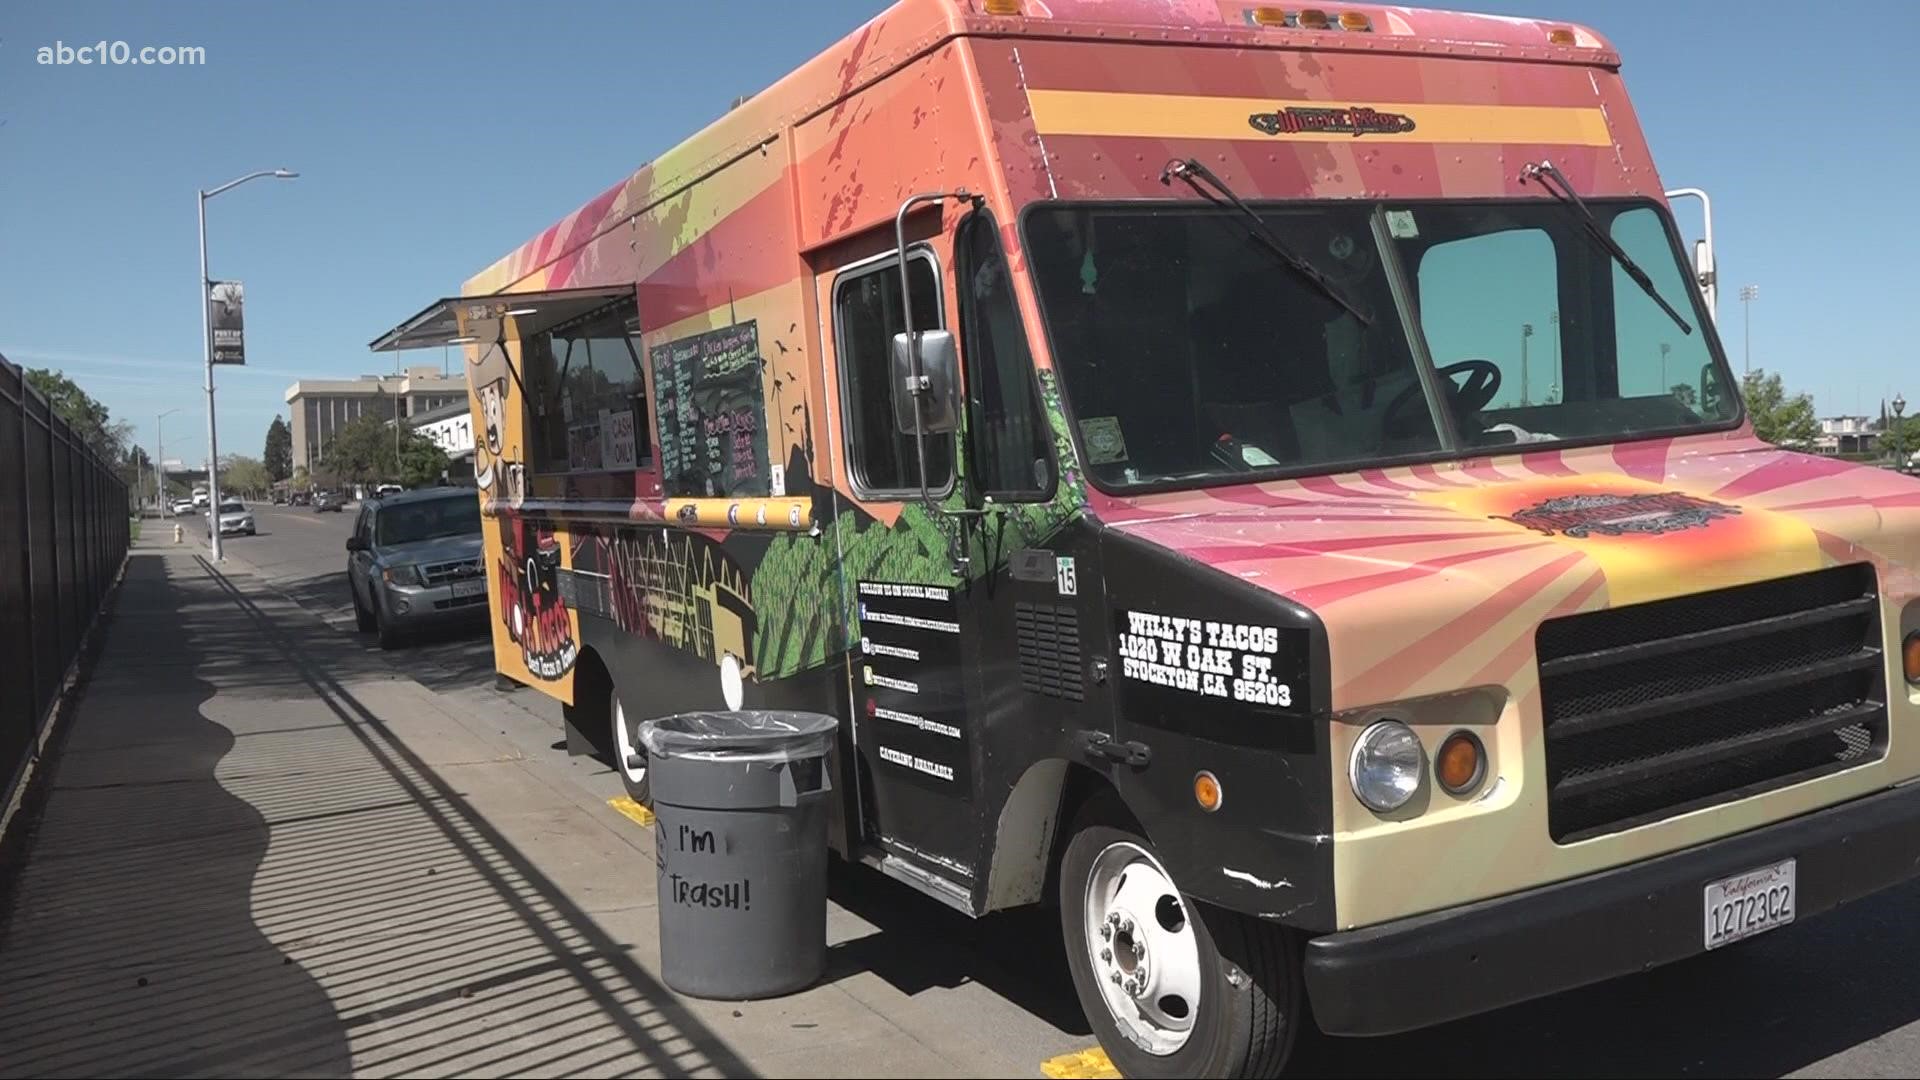 Soaring gas prices, meat prices, and pandemic reasons cited for higher operating costs for food trucks in Stockton.